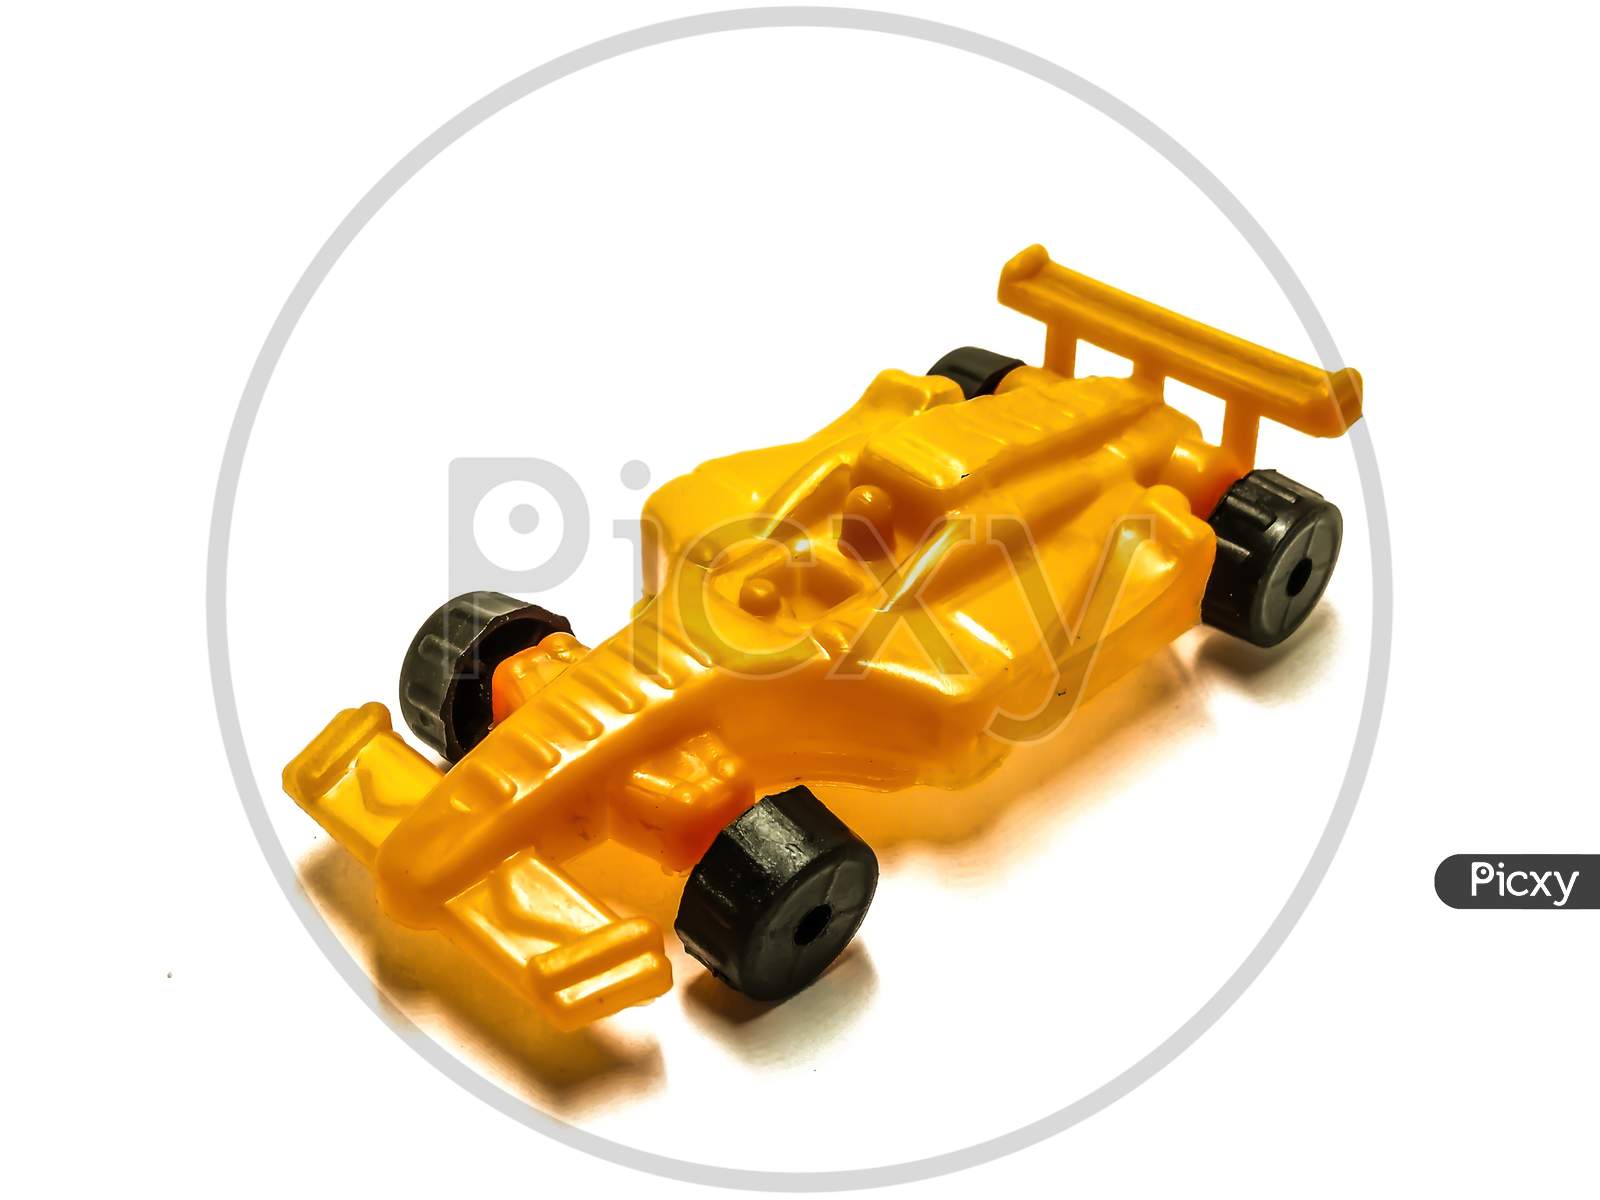 A picture of toy car